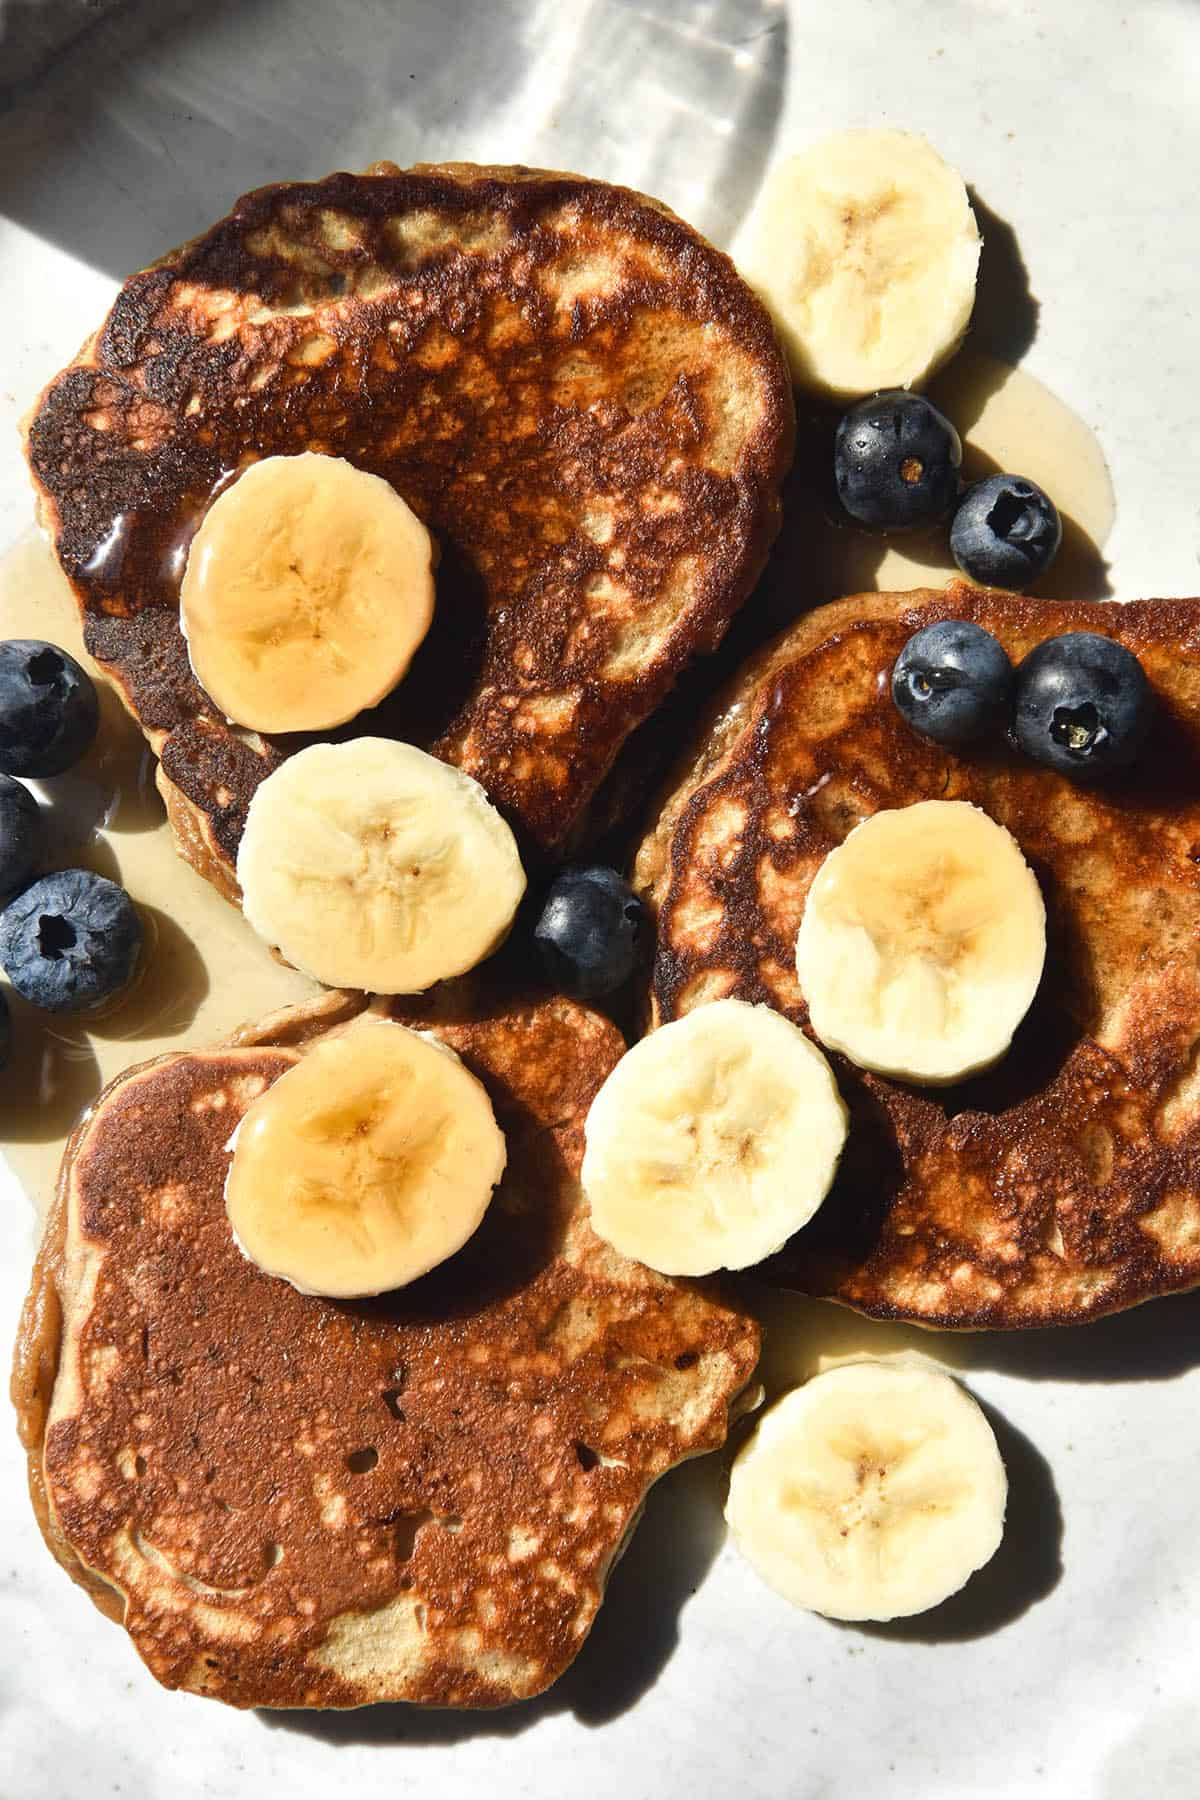 An aerial close up image of protein powder pancakes on a white ceramic plate. The pancakes are topped with sliced banana, blueberries and maple syrup.